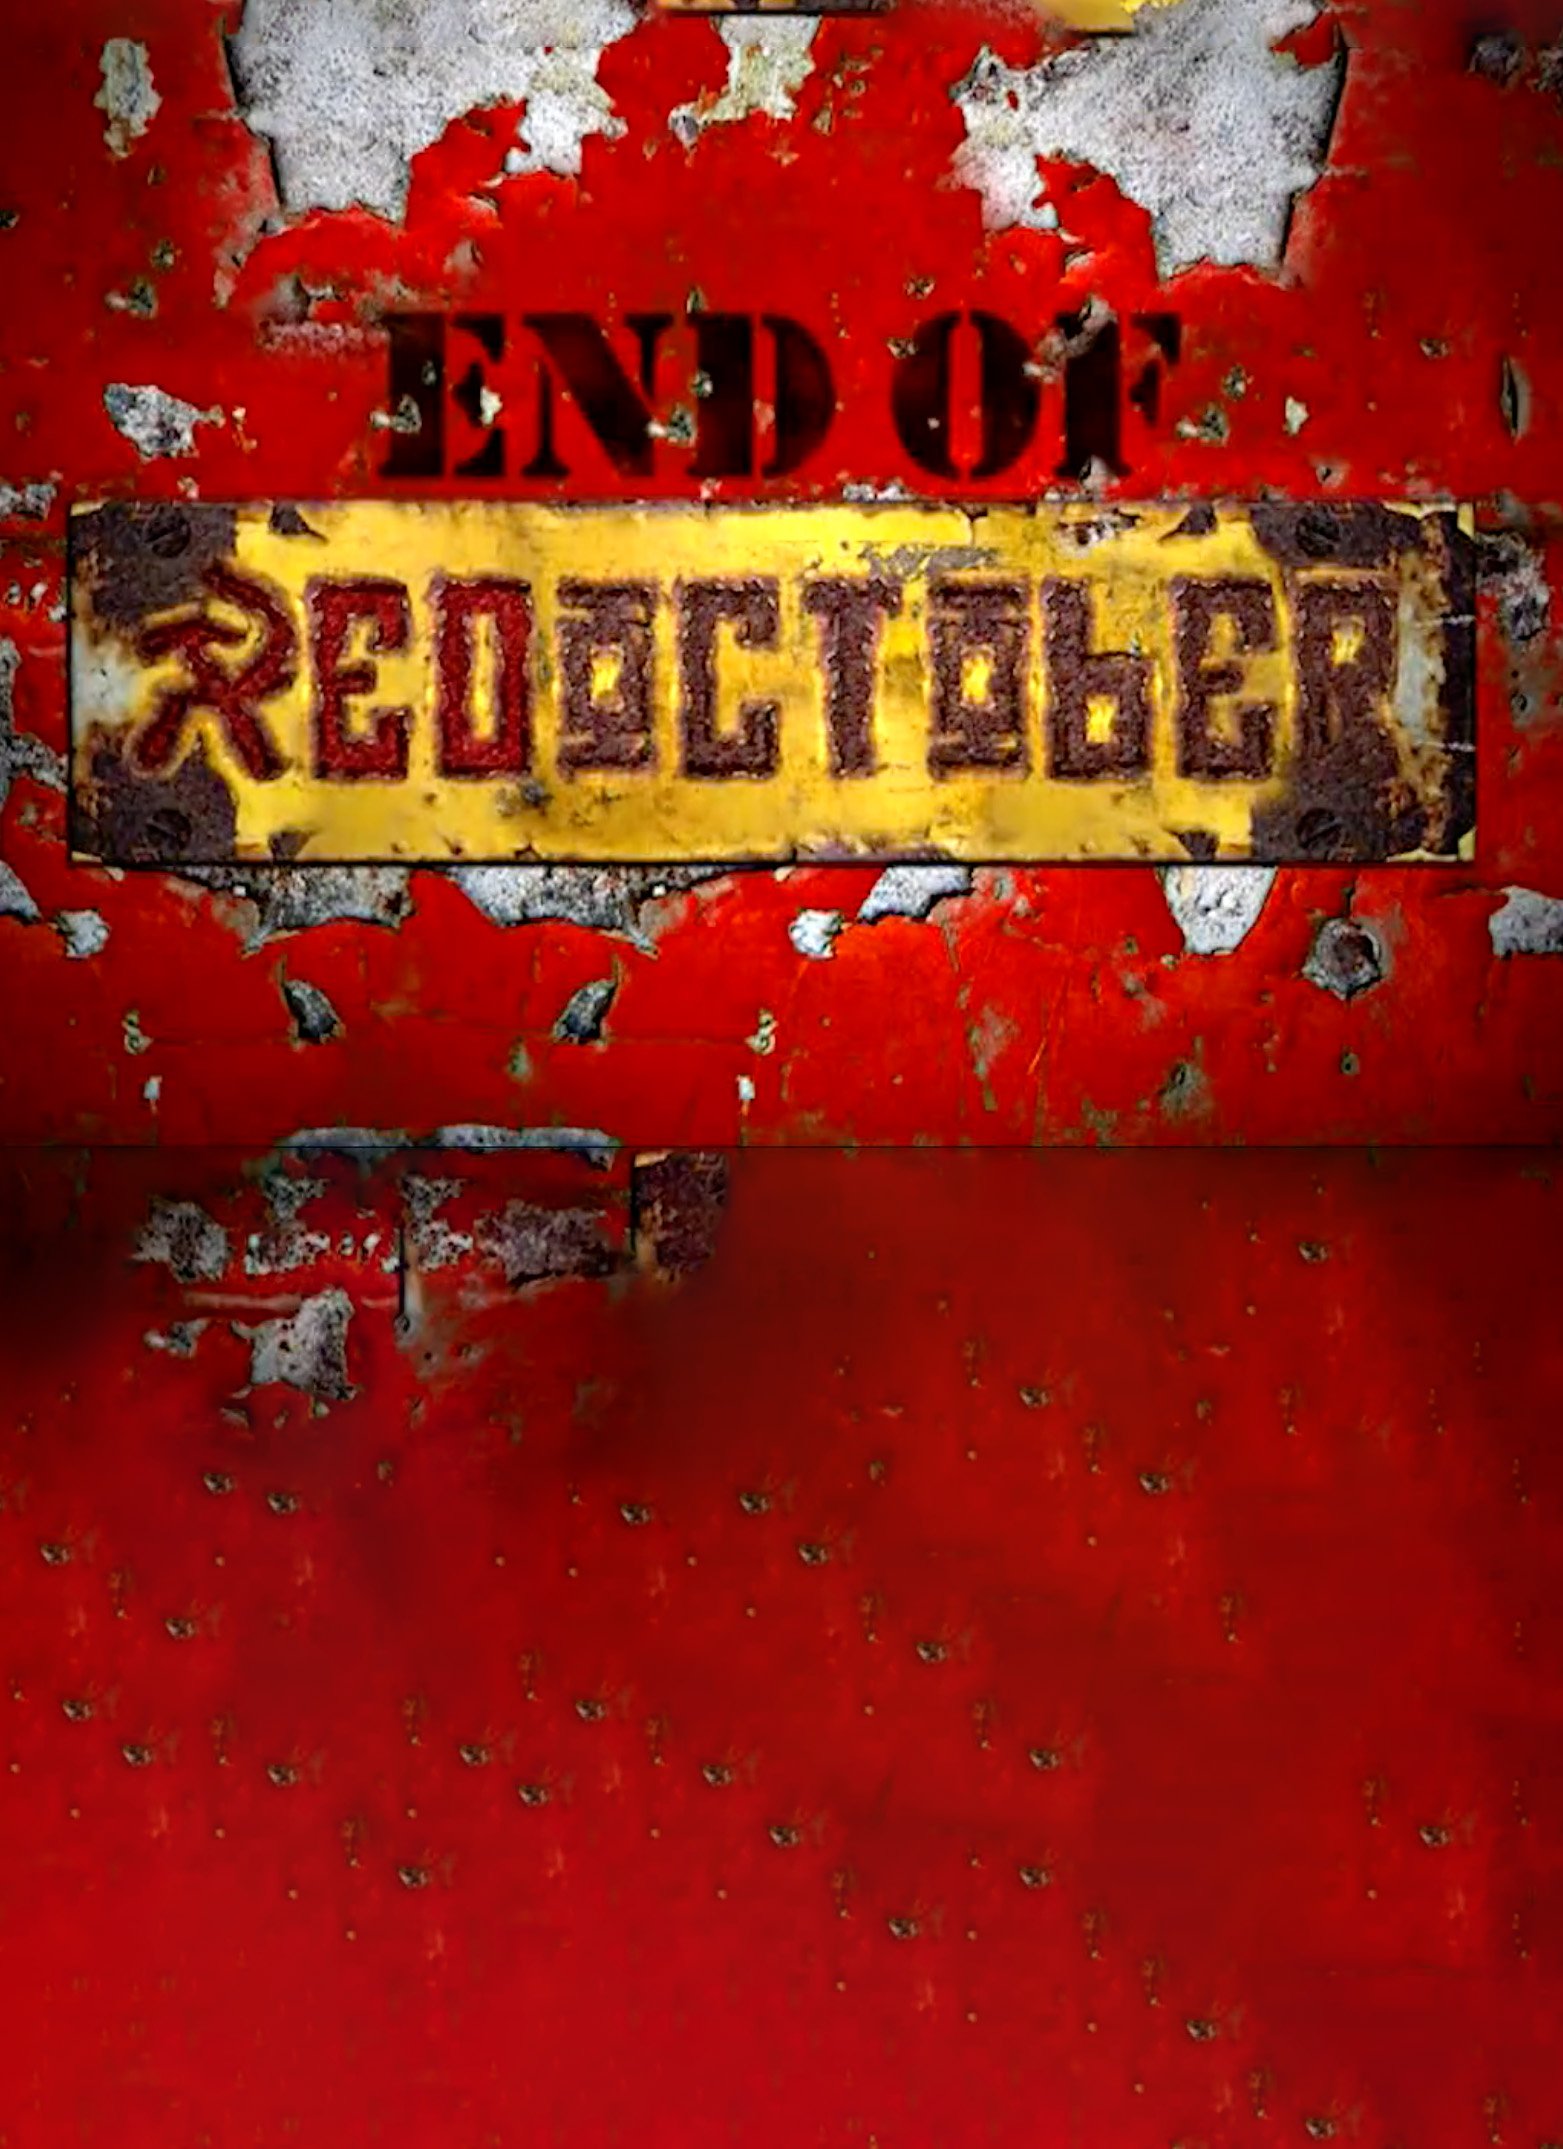 End of Red October